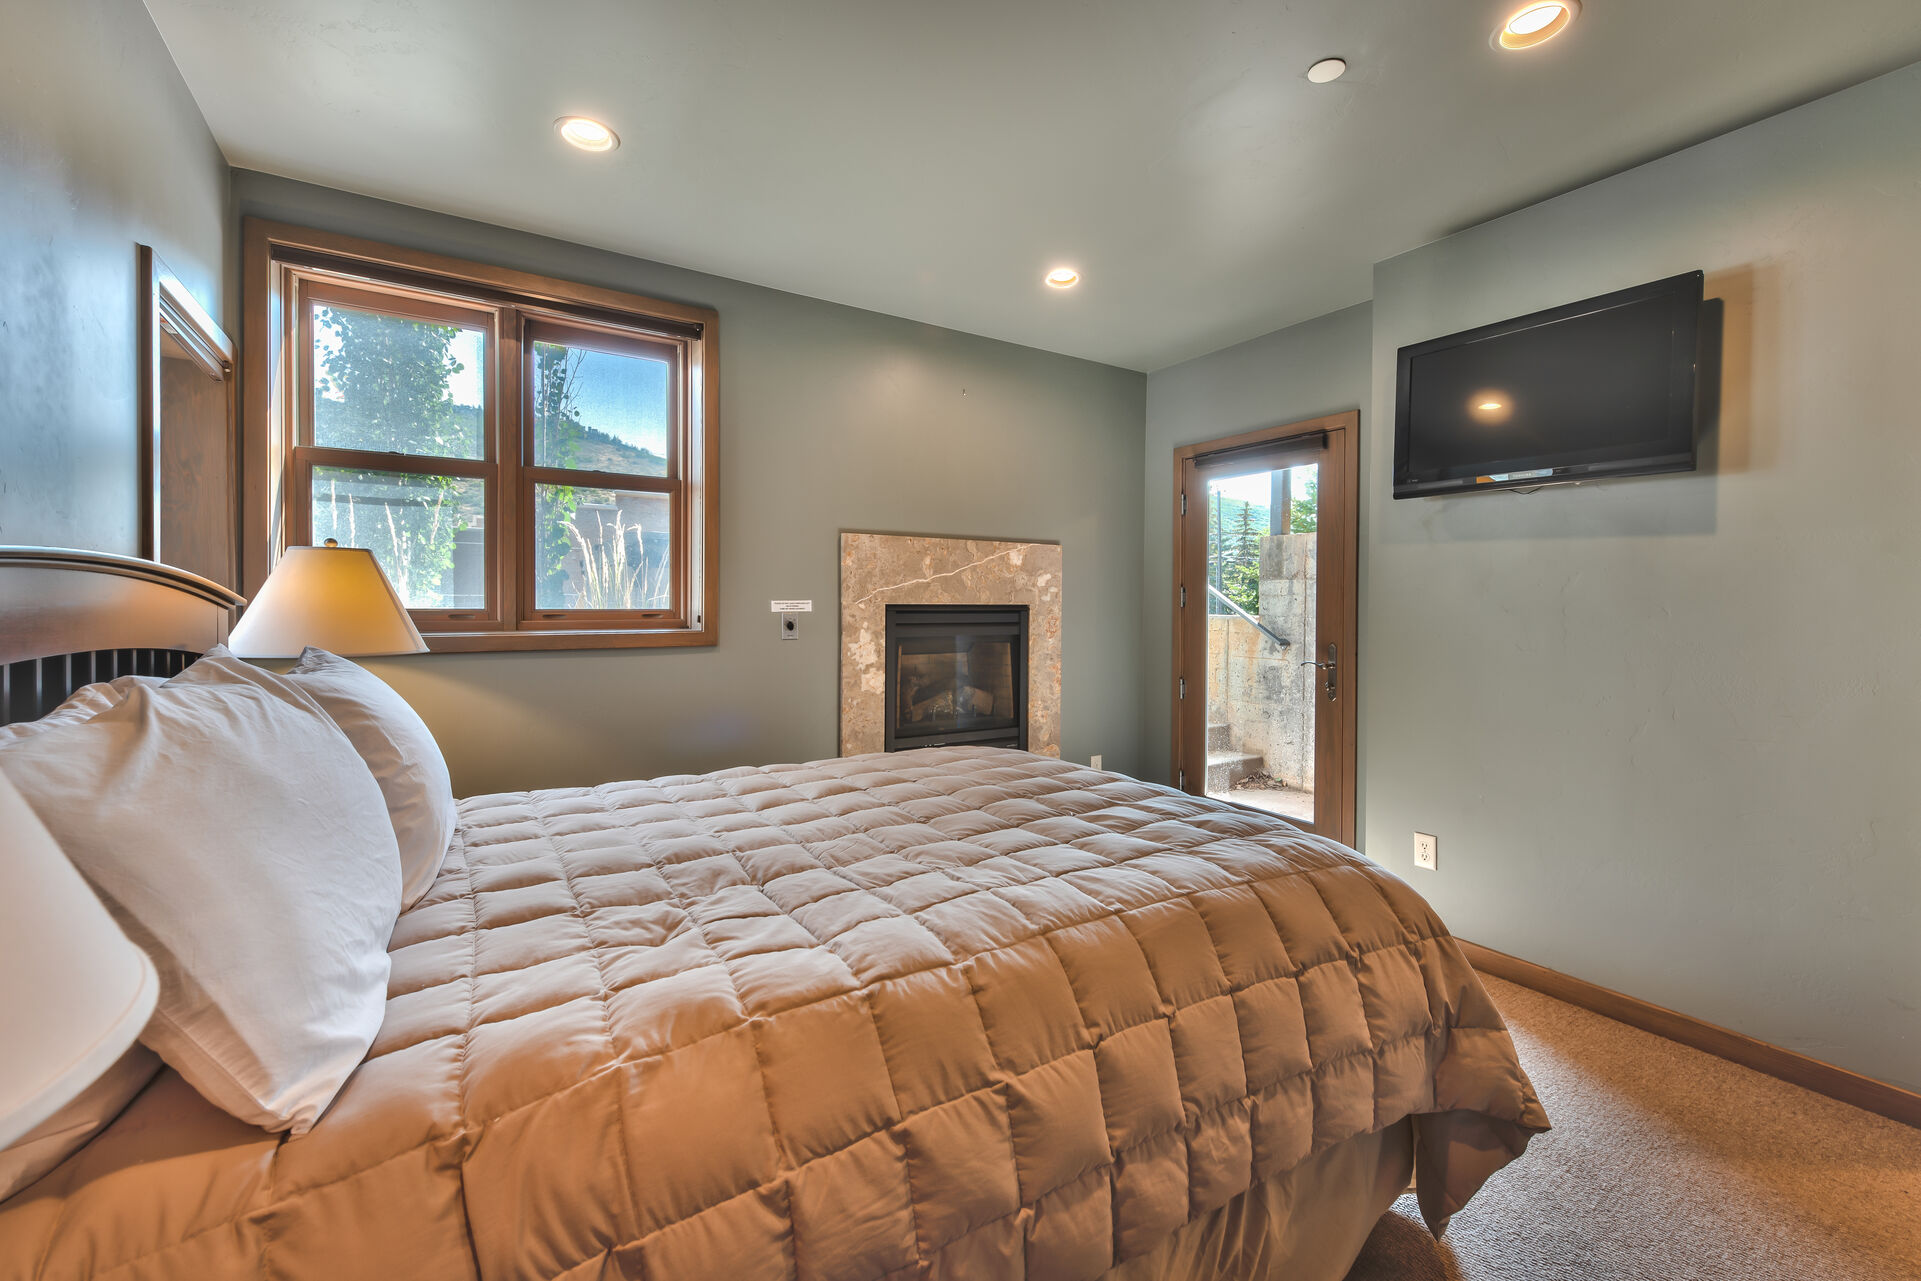 Level 1 - 2nd Master Bedroom with a Queen Bed, Radiant Heat, a Gas Fireplace, Private Bath and Backyard Access